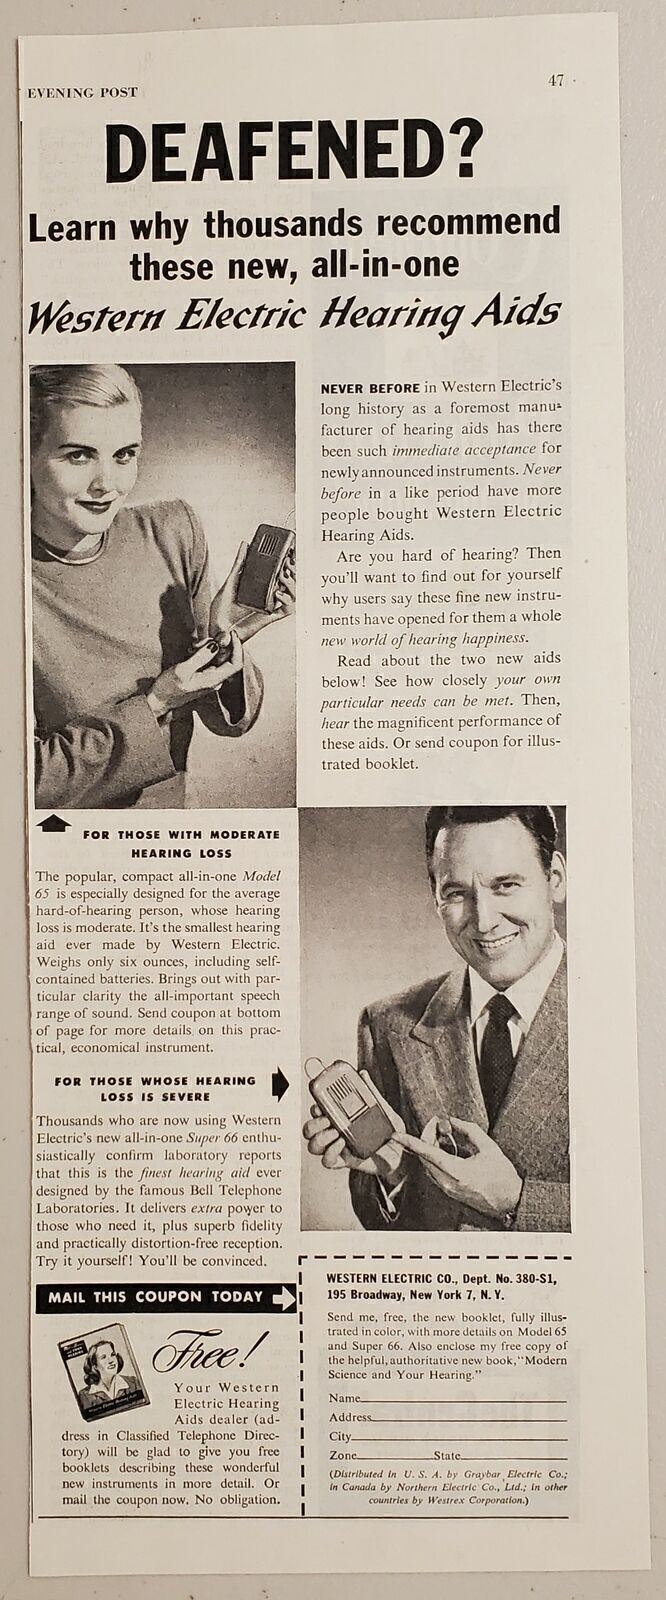 1948 Print Ad Western Electric Hearing Aids For Moderate or Severe Hearing Loss